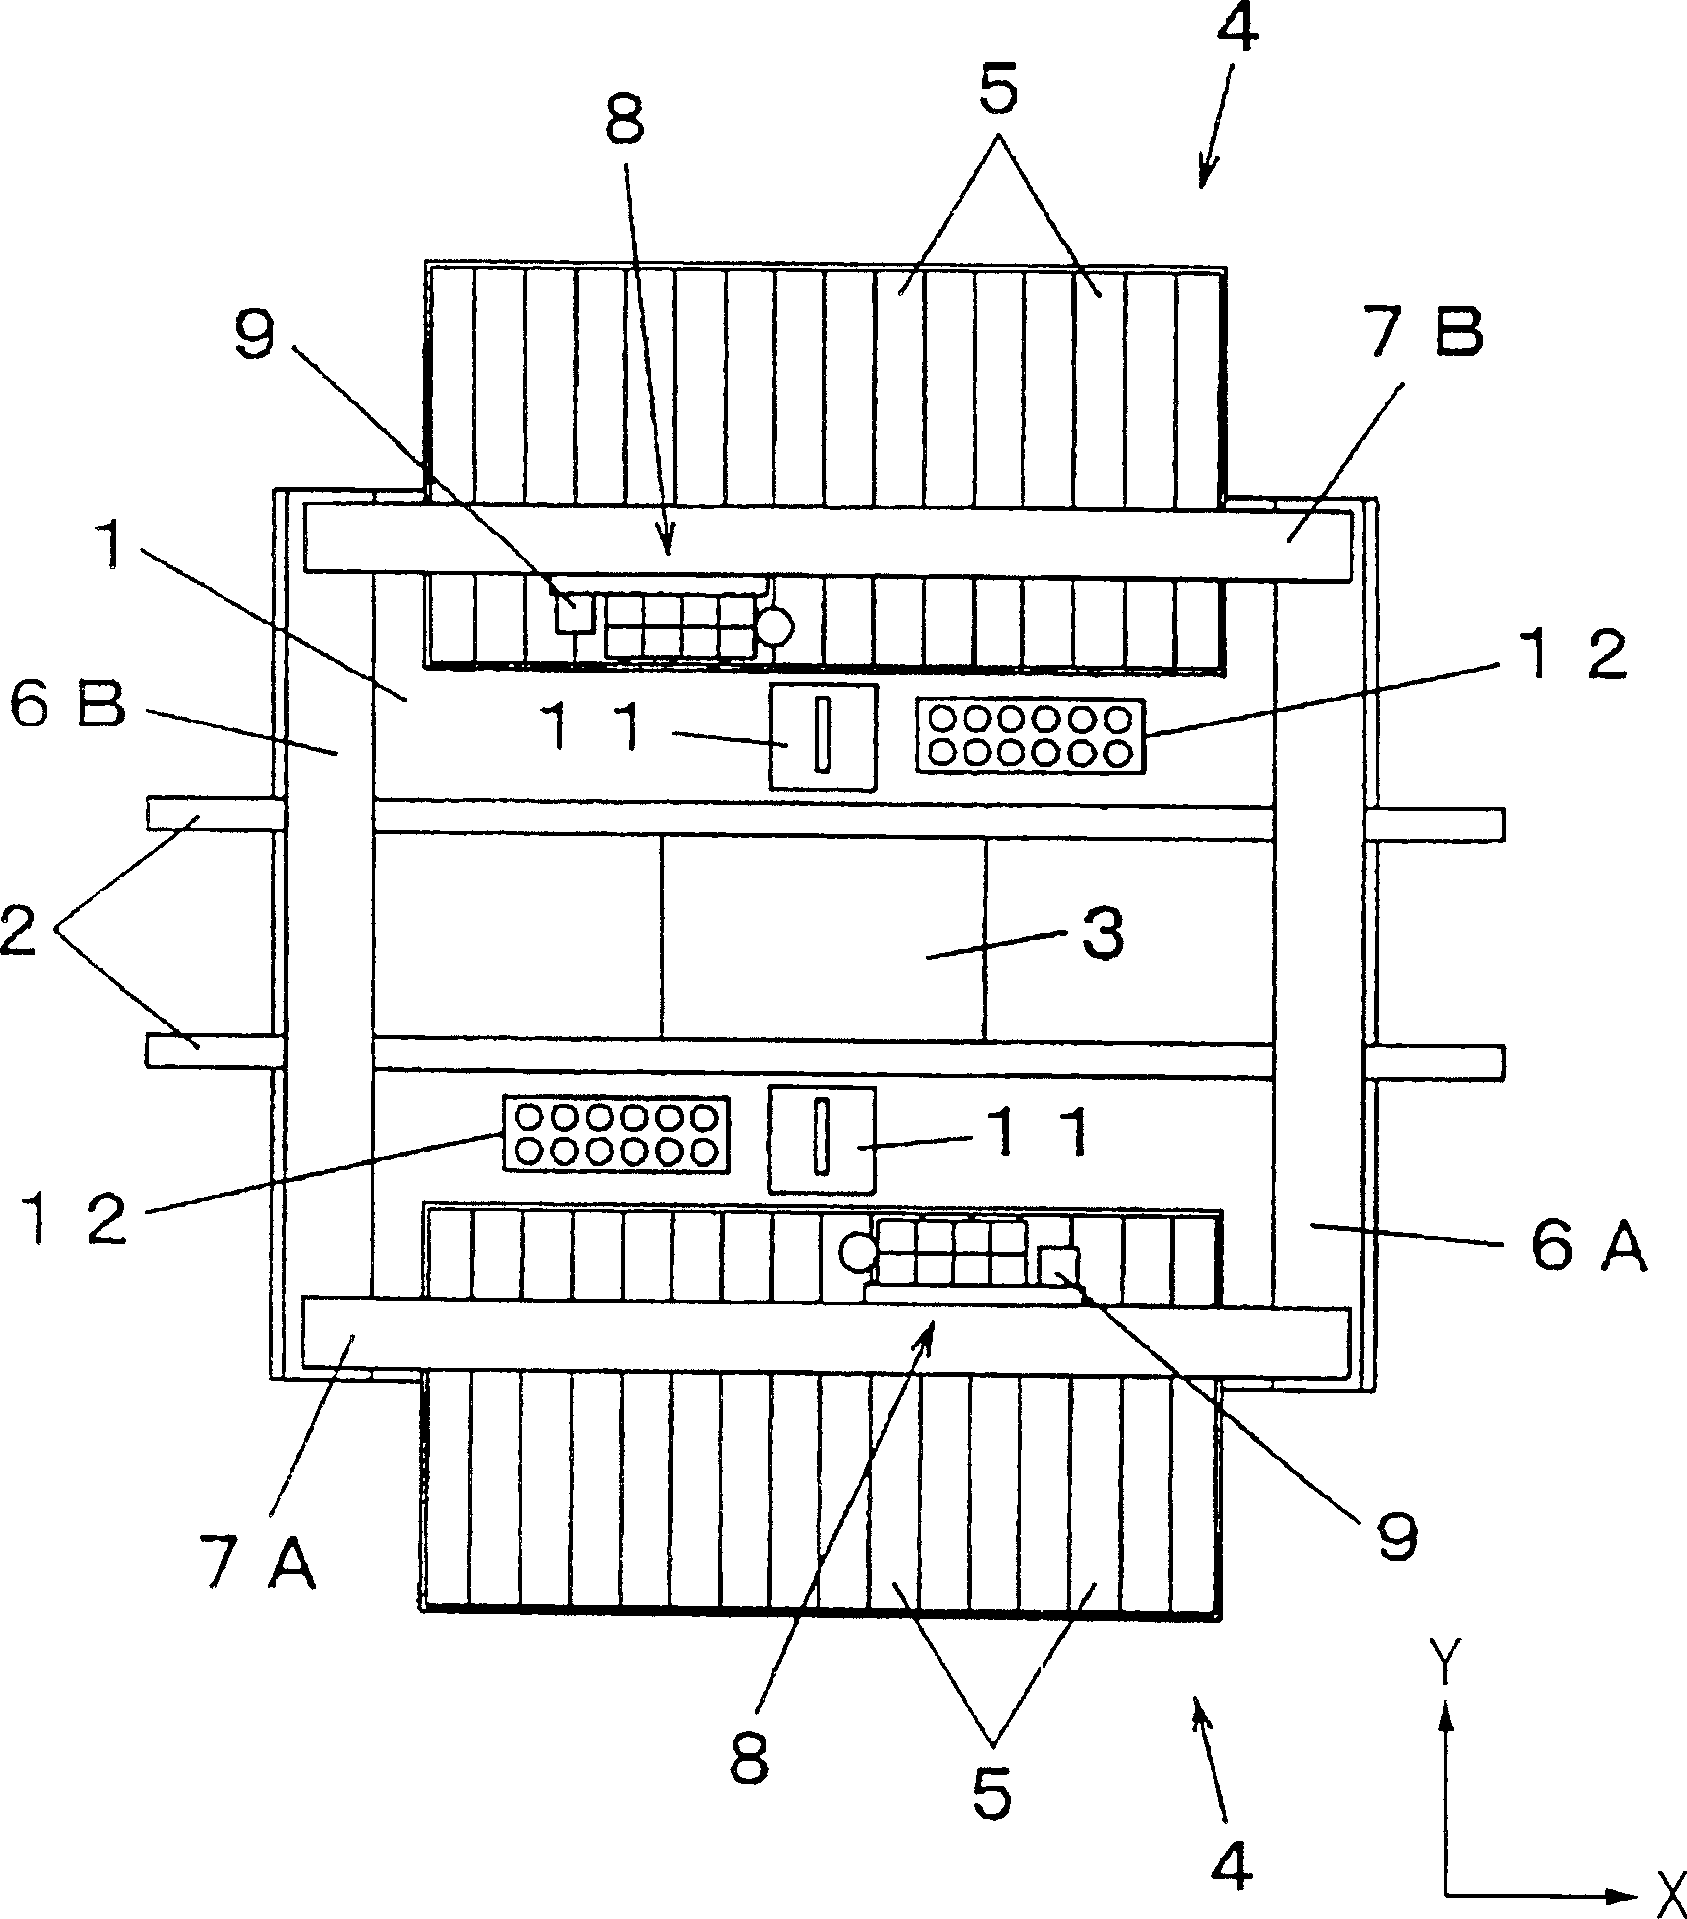 Electronic parts mounting apparatus and method